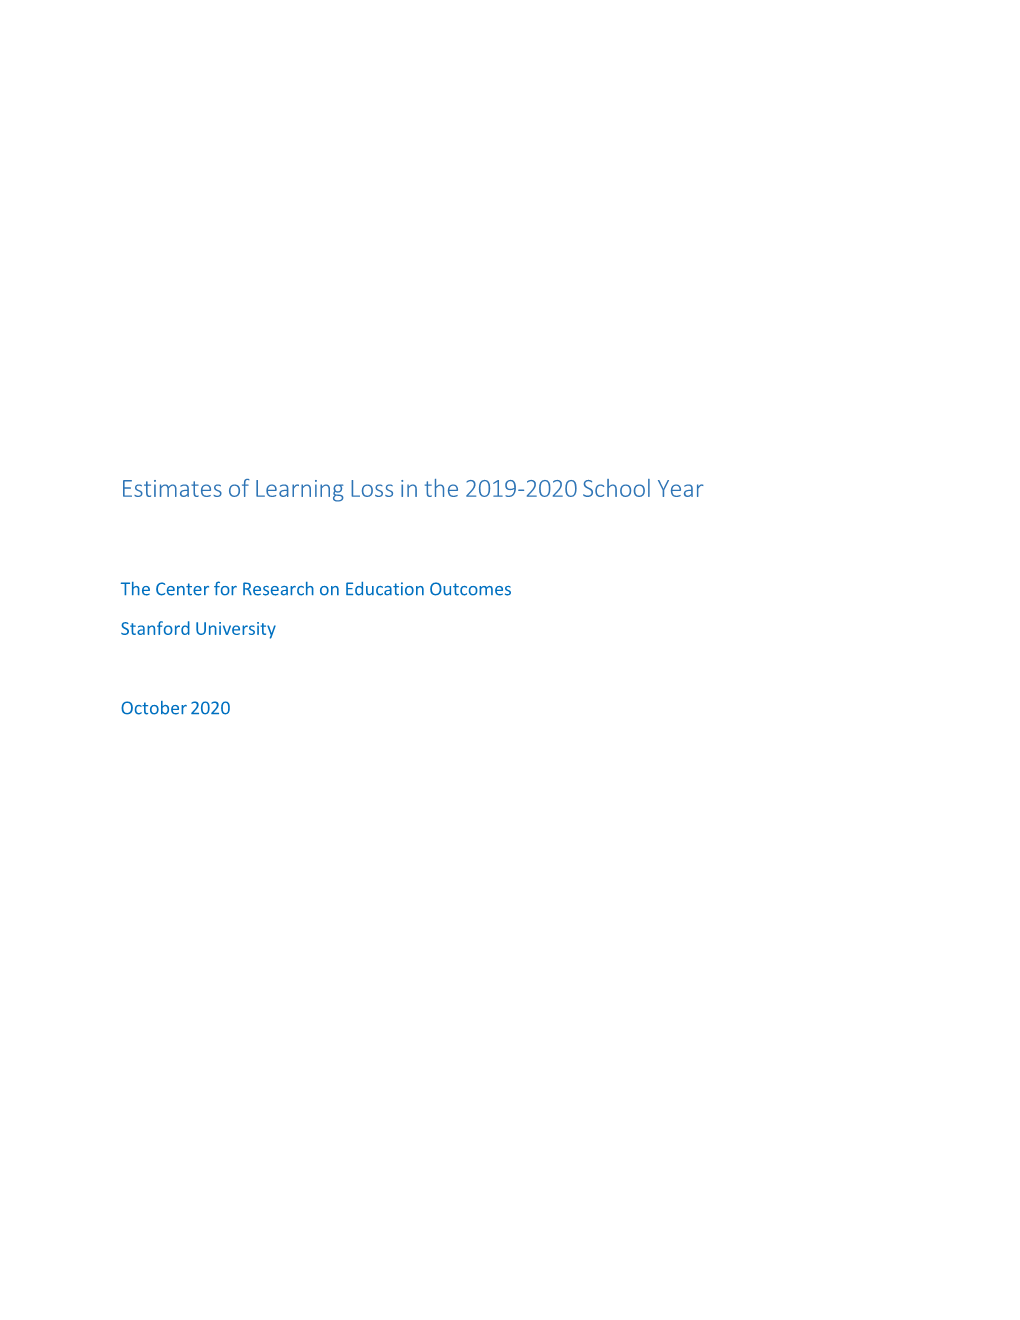 Estimates of Learning Loss in the 2019-2020 School Year